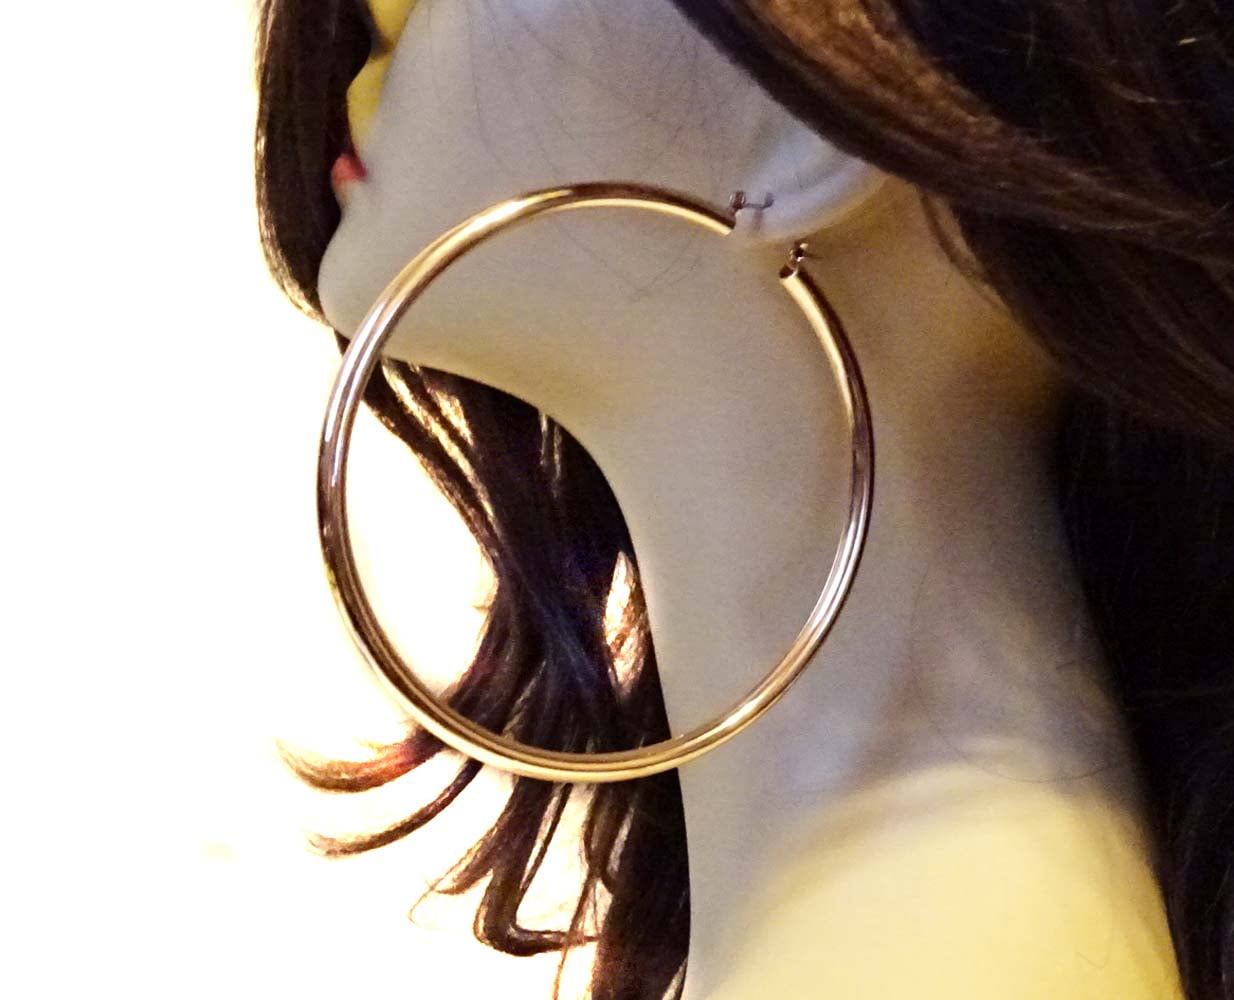 Awesome New Classic Yellow Gold Plated Smooth and Shiny 1.75 Round Hoop Earrings for Women Lady